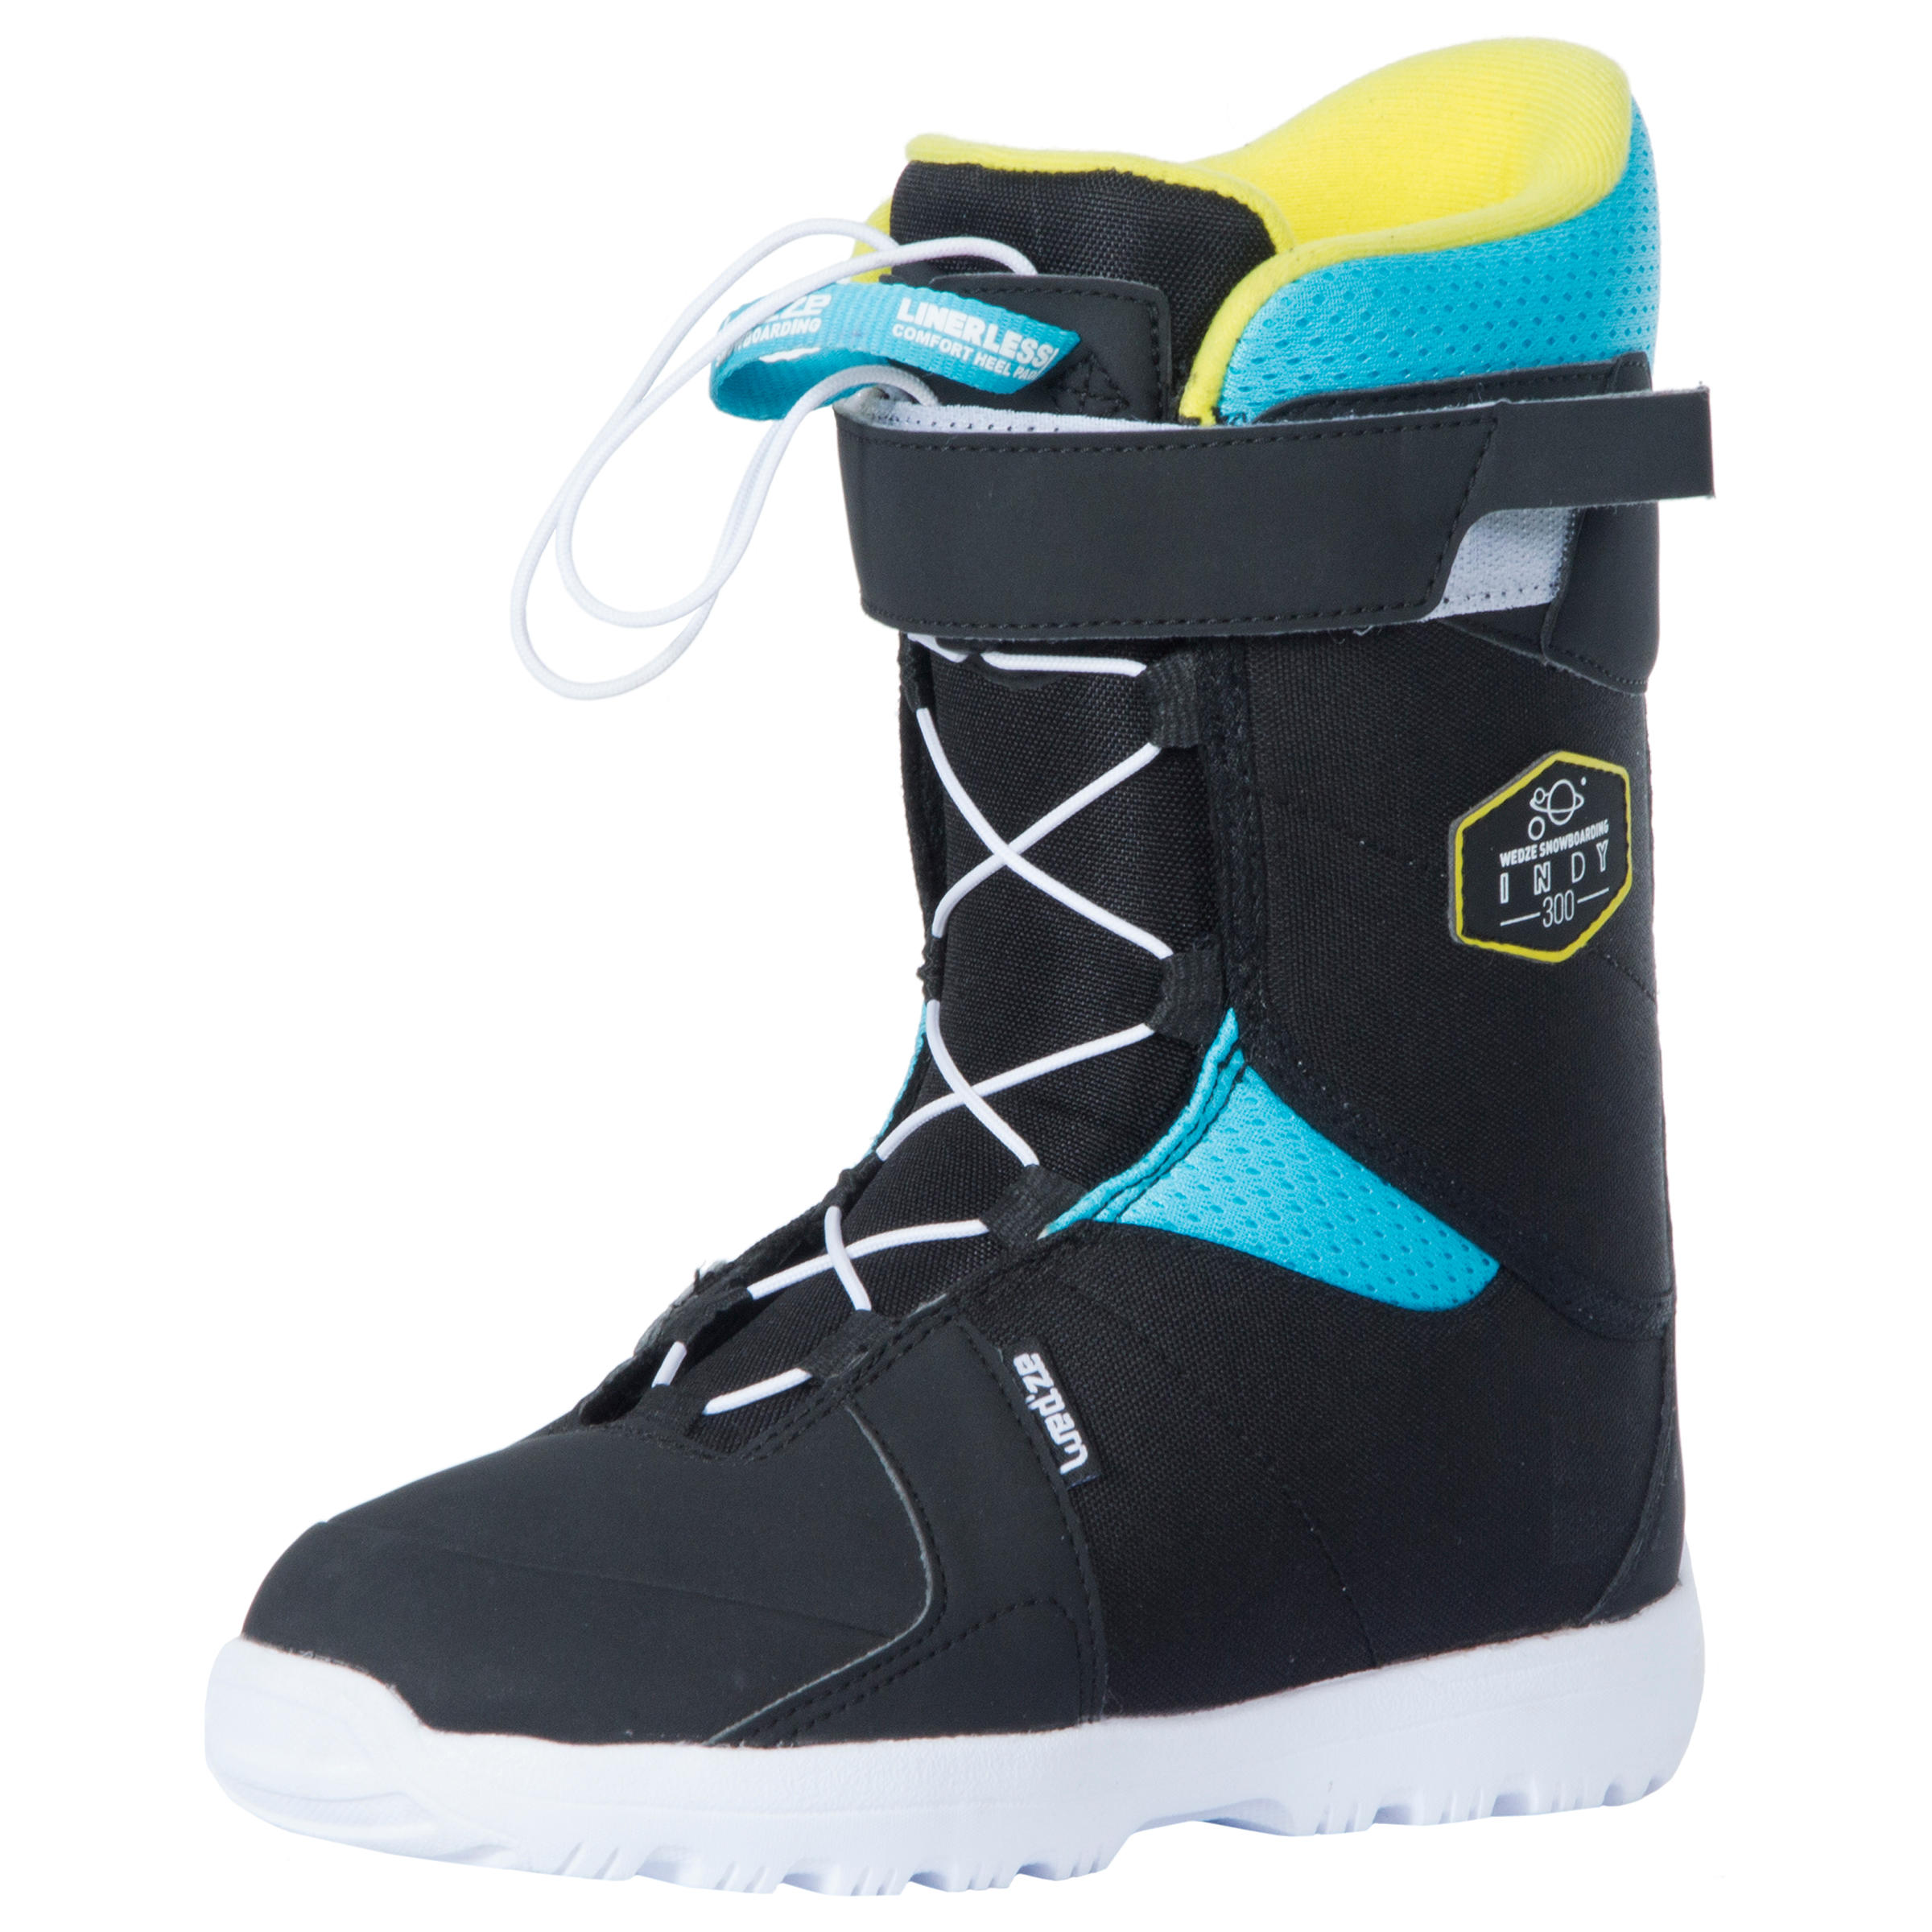 Boots snowboard all mountain/freestyle Indy 300 Copii decathlon.ro imagine 2022